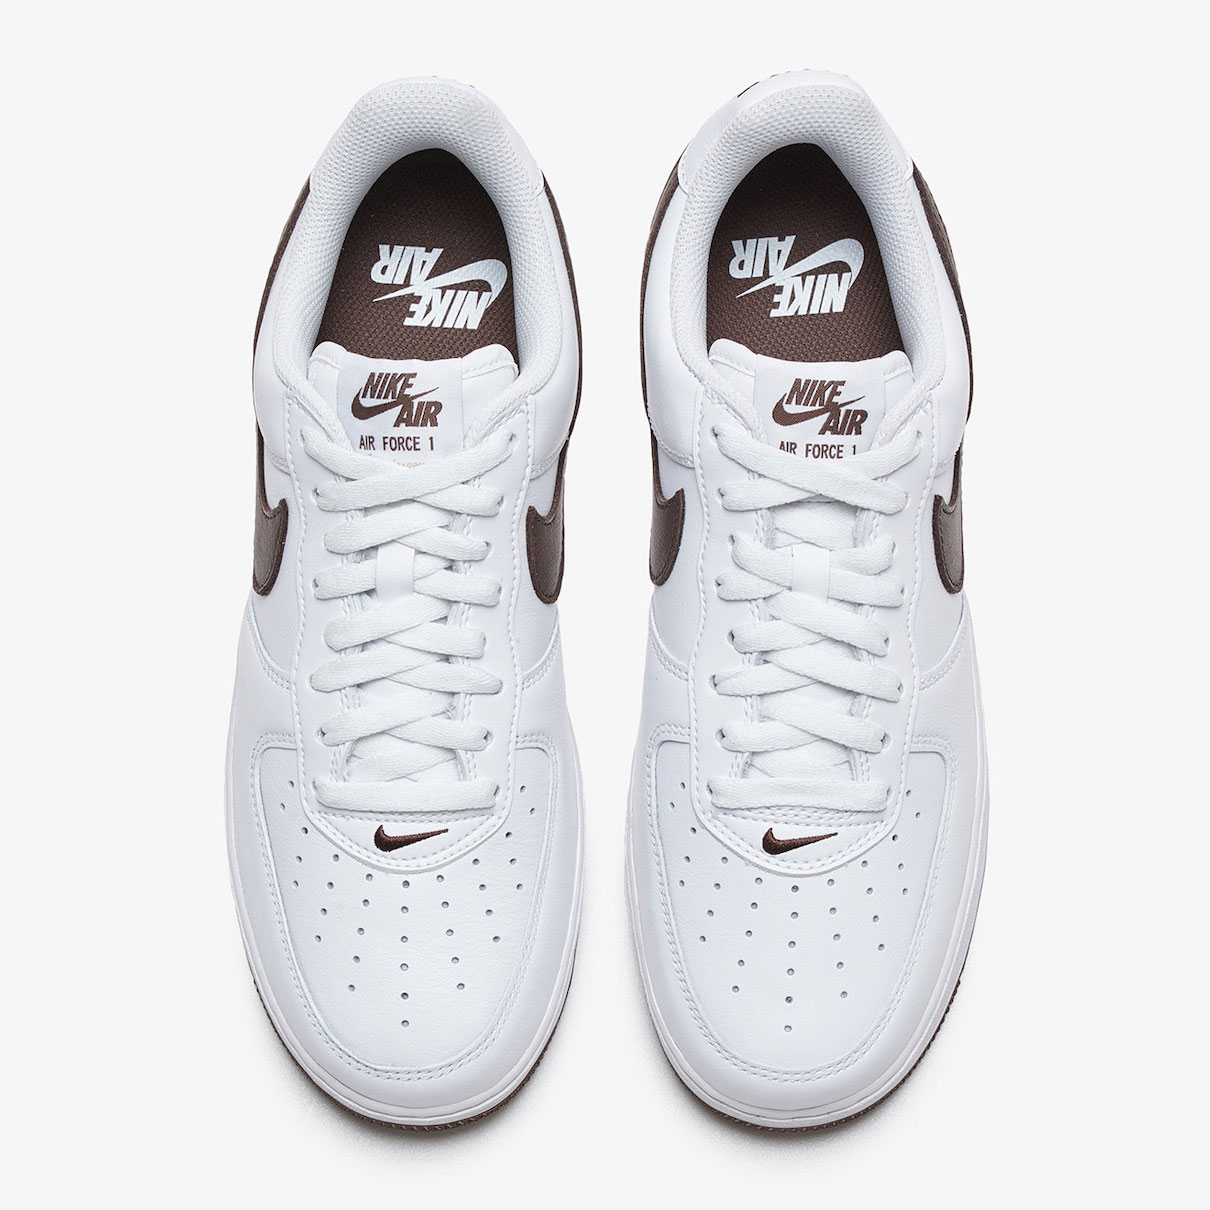 Nike Air Force 1 Low “White Chocolate” DM0576-100